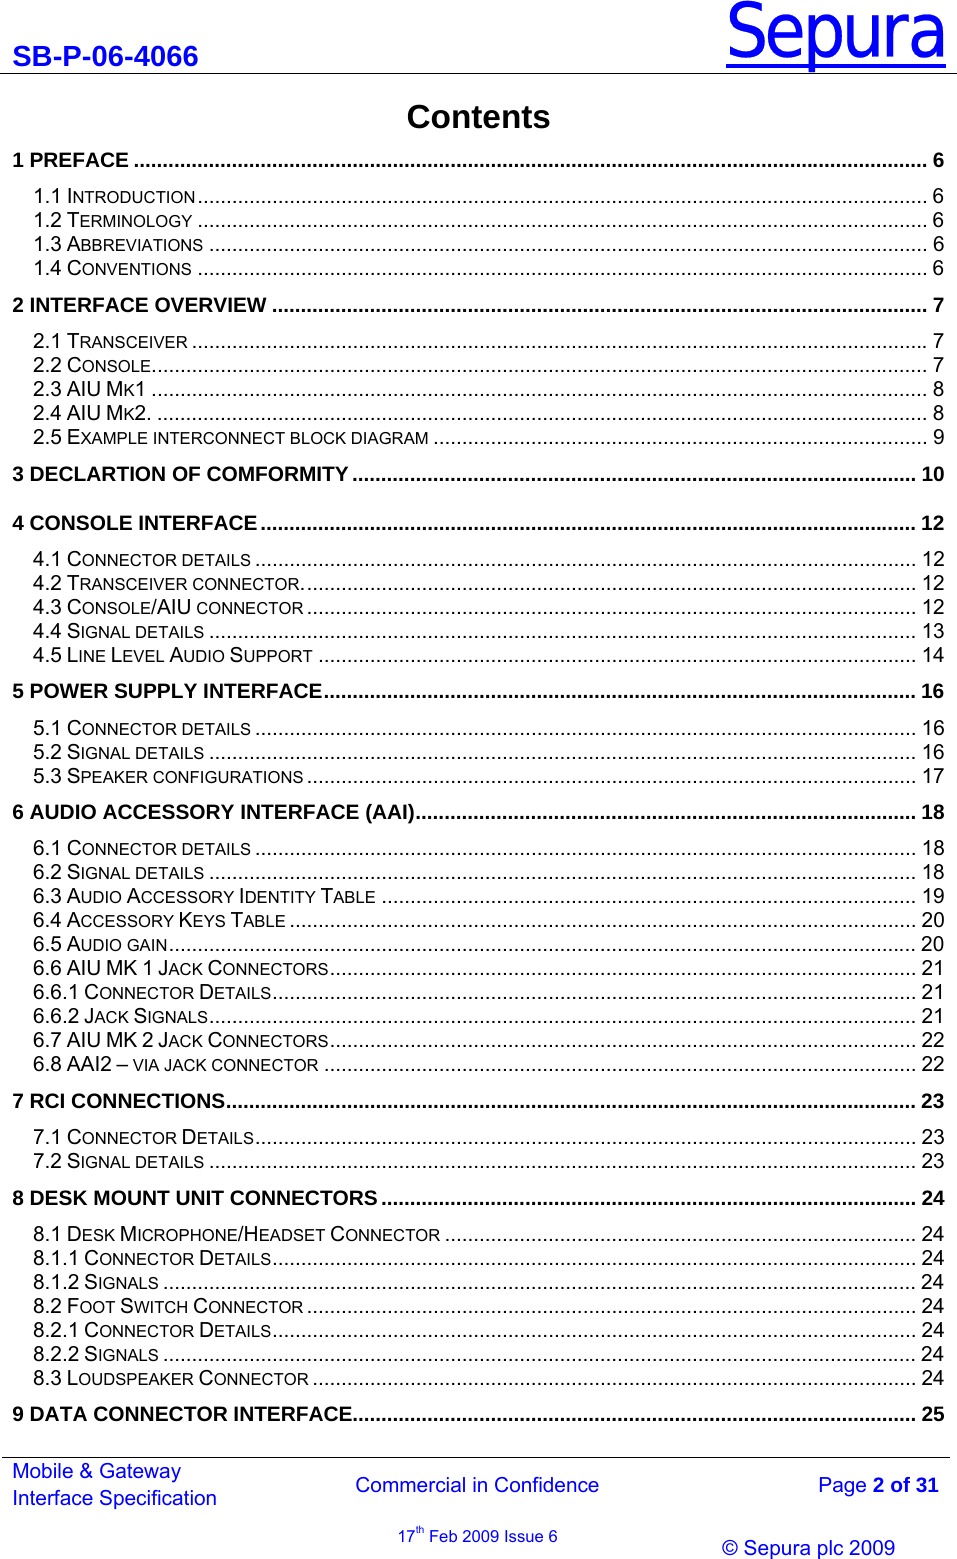 SB-P-06-4066 Sepura  Commercial in Confidence   Page 2 of 31 Mobile &amp; Gateway Interface Specification 17th Feb 2009 Issue 6                © Sepura plc 2009   Contents 1 PREFACE .......................................................................................................................................... 6 1.1 INTRODUCTION............................................................................................................................... 6 1.2 TERMINOLOGY ............................................................................................................................... 6 1.3 ABBREVIATIONS ............................................................................................................................. 6 1.4 CONVENTIONS ............................................................................................................................... 6 2 INTERFACE OVERVIEW .................................................................................................................. 7 2.1 TRANSCEIVER ................................................................................................................................7 2.2 CONSOLE....................................................................................................................................... 7 2.3 AIU MK1 ....................................................................................................................................... 8 2.4 AIU MK2. ...................................................................................................................................... 8 2.5 EXAMPLE INTERCONNECT BLOCK DIAGRAM ...................................................................................... 9 3 DECLARTION OF COMFORMITY.................................................................................................. 10 4 CONSOLE INTERFACE.................................................................................................................. 12 4.1 CONNECTOR DETAILS ................................................................................................................... 12 4.2 TRANSCEIVER CONNECTOR........................................................................................................... 12 4.3 CONSOLE/AIU CONNECTOR .......................................................................................................... 12 4.4 SIGNAL DETAILS ........................................................................................................................... 13 4.5 LINE LEVEL AUDIO SUPPORT ........................................................................................................ 14 5 POWER SUPPLY INTERFACE....................................................................................................... 16 5.1 CONNECTOR DETAILS ................................................................................................................... 16 5.2 SIGNAL DETAILS ........................................................................................................................... 16 5.3 SPEAKER CONFIGURATIONS .......................................................................................................... 17 6 AUDIO ACCESSORY INTERFACE (AAI)....................................................................................... 18 6.1 CONNECTOR DETAILS ................................................................................................................... 18 6.2 SIGNAL DETAILS ........................................................................................................................... 18 6.3 AUDIO ACCESSORY IDENTITY TABLE ............................................................................................. 19 6.4 ACCESSORY KEYS TABLE ............................................................................................................. 20 6.5 AUDIO GAIN.................................................................................................................................. 20 6.6 AIU MK 1 JACK CONNECTORS...................................................................................................... 21 6.6.1 CONNECTOR DETAILS................................................................................................................ 21 6.6.2 JACK SIGNALS........................................................................................................................... 21 6.7 AIU MK 2 JACK CONNECTORS...................................................................................................... 22 6.8 AAI2 – VIA JACK CONNECTOR ....................................................................................................... 22 7 RCI CONNECTIONS........................................................................................................................ 23 7.1 CONNECTOR DETAILS................................................................................................................... 23 7.2 SIGNAL DETAILS ........................................................................................................................... 23 8 DESK MOUNT UNIT CONNECTORS............................................................................................. 24 8.1 DESK MICROPHONE/HEADSET CONNECTOR .................................................................................. 24 8.1.1 CONNECTOR DETAILS................................................................................................................ 24 8.1.2 SIGNALS ................................................................................................................................... 24 8.2 FOOT SWITCH CONNECTOR .......................................................................................................... 24 8.2.1 CONNECTOR DETAILS................................................................................................................ 24 8.2.2 SIGNALS ................................................................................................................................... 24 8.3 LOUDSPEAKER CONNECTOR ......................................................................................................... 24 9 DATA CONNECTOR INTERFACE.................................................................................................. 25 